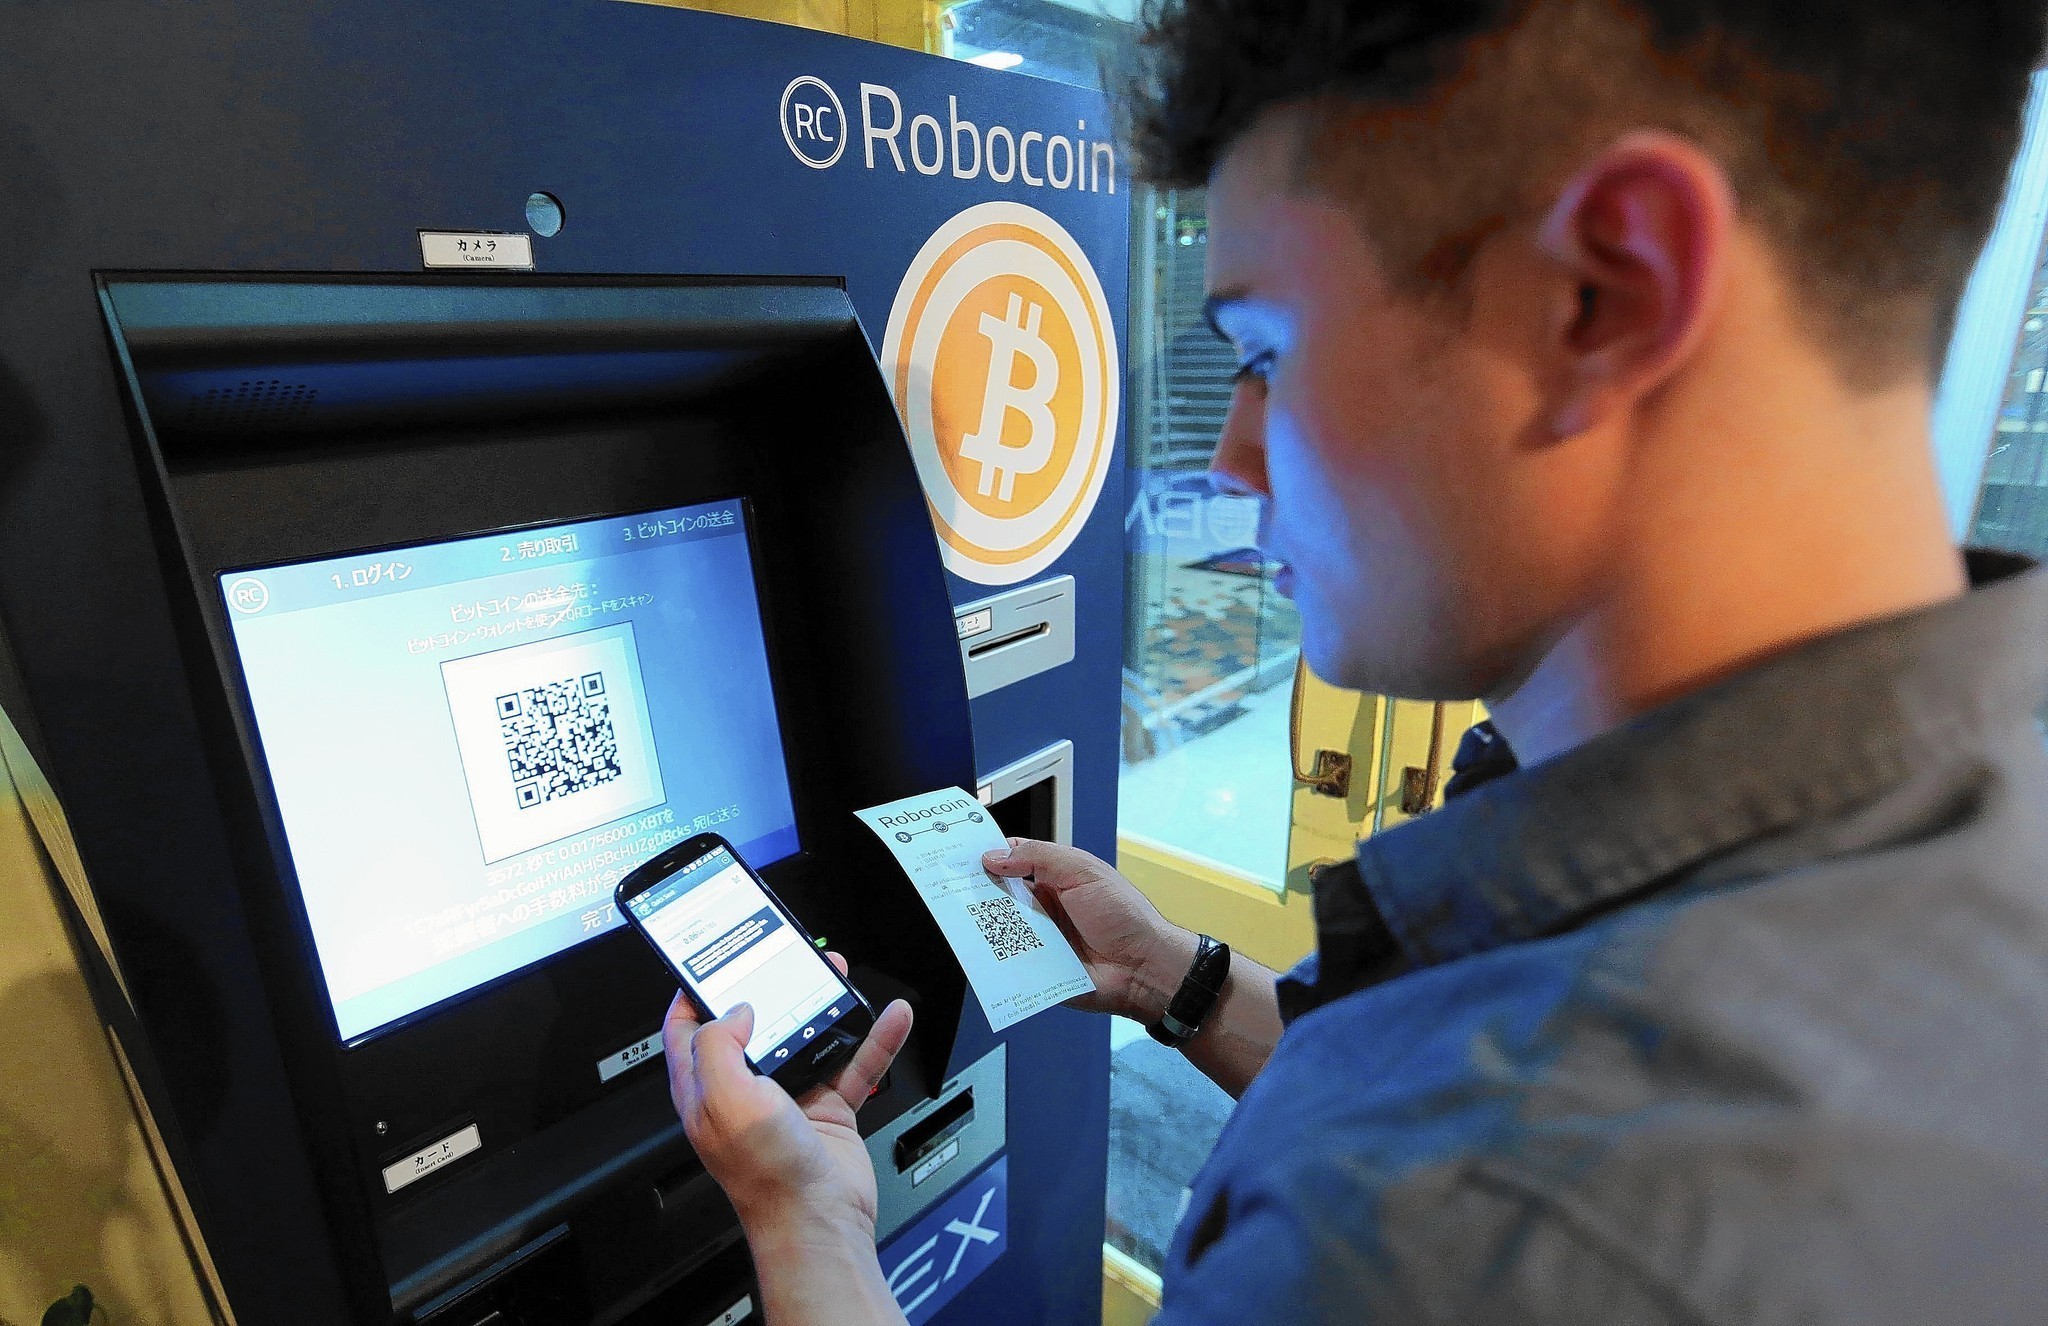 Robocoin demonstrate Bitcoin ATM usage At The Pink Cow Restaurant